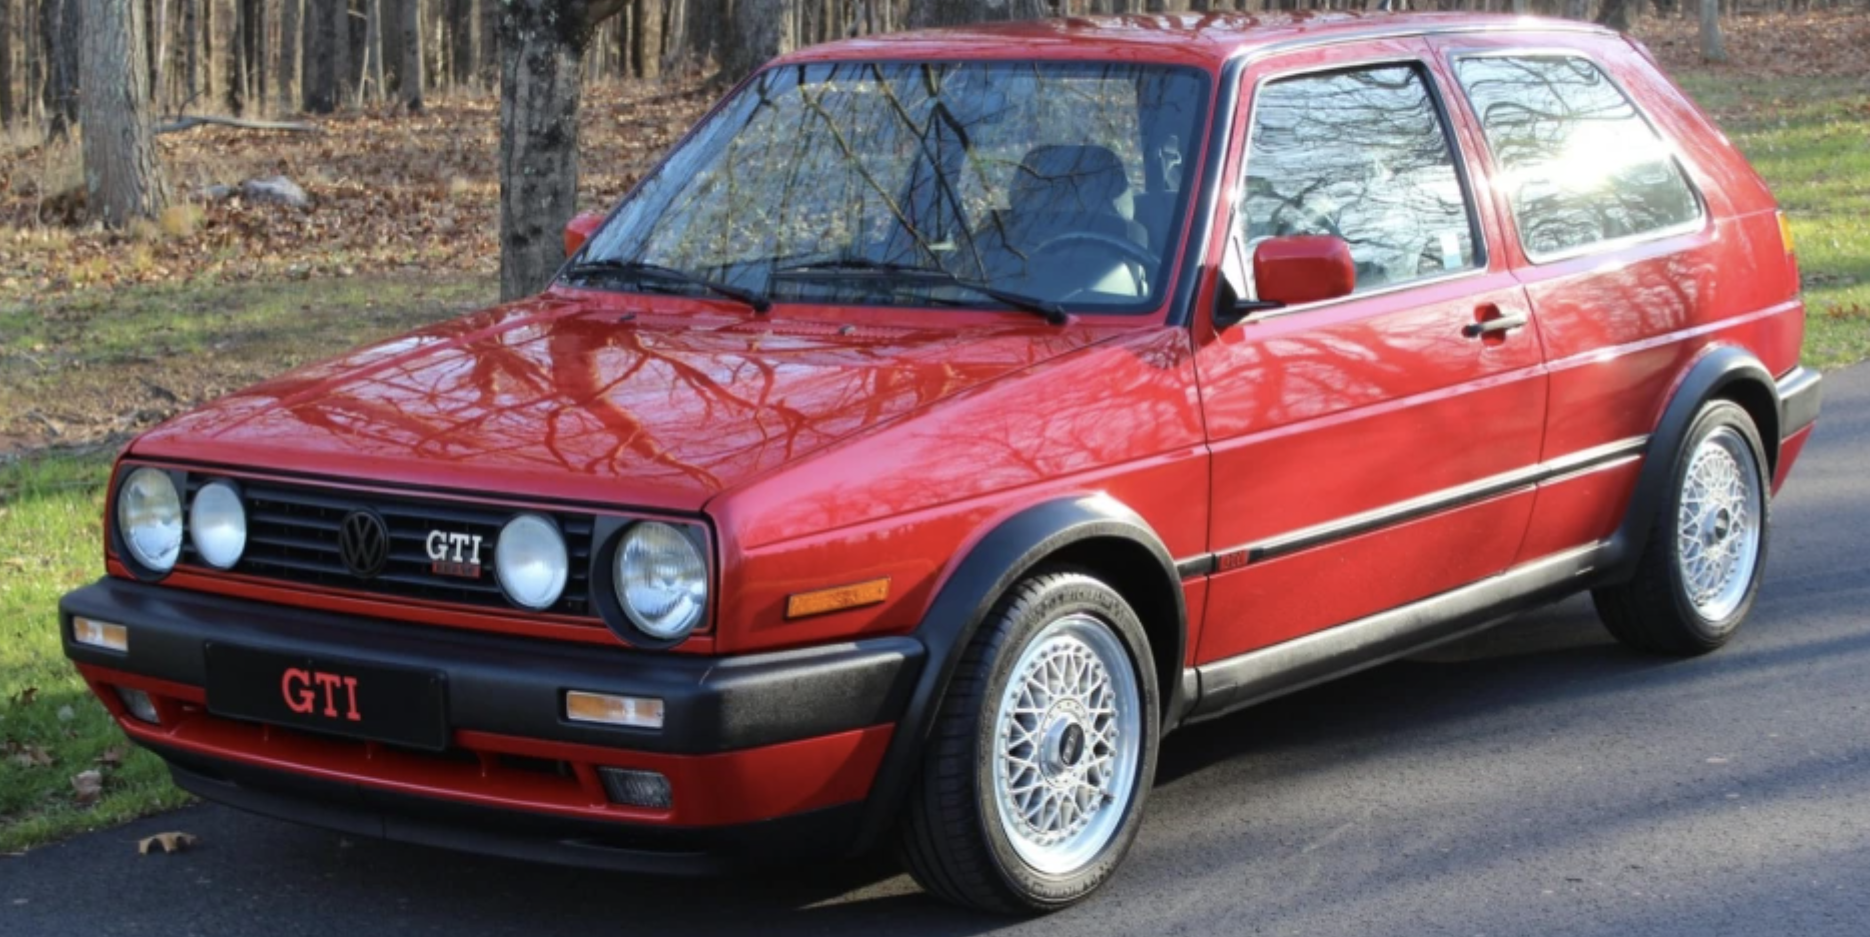 A 1992 Golf GTI Sold for $87,000